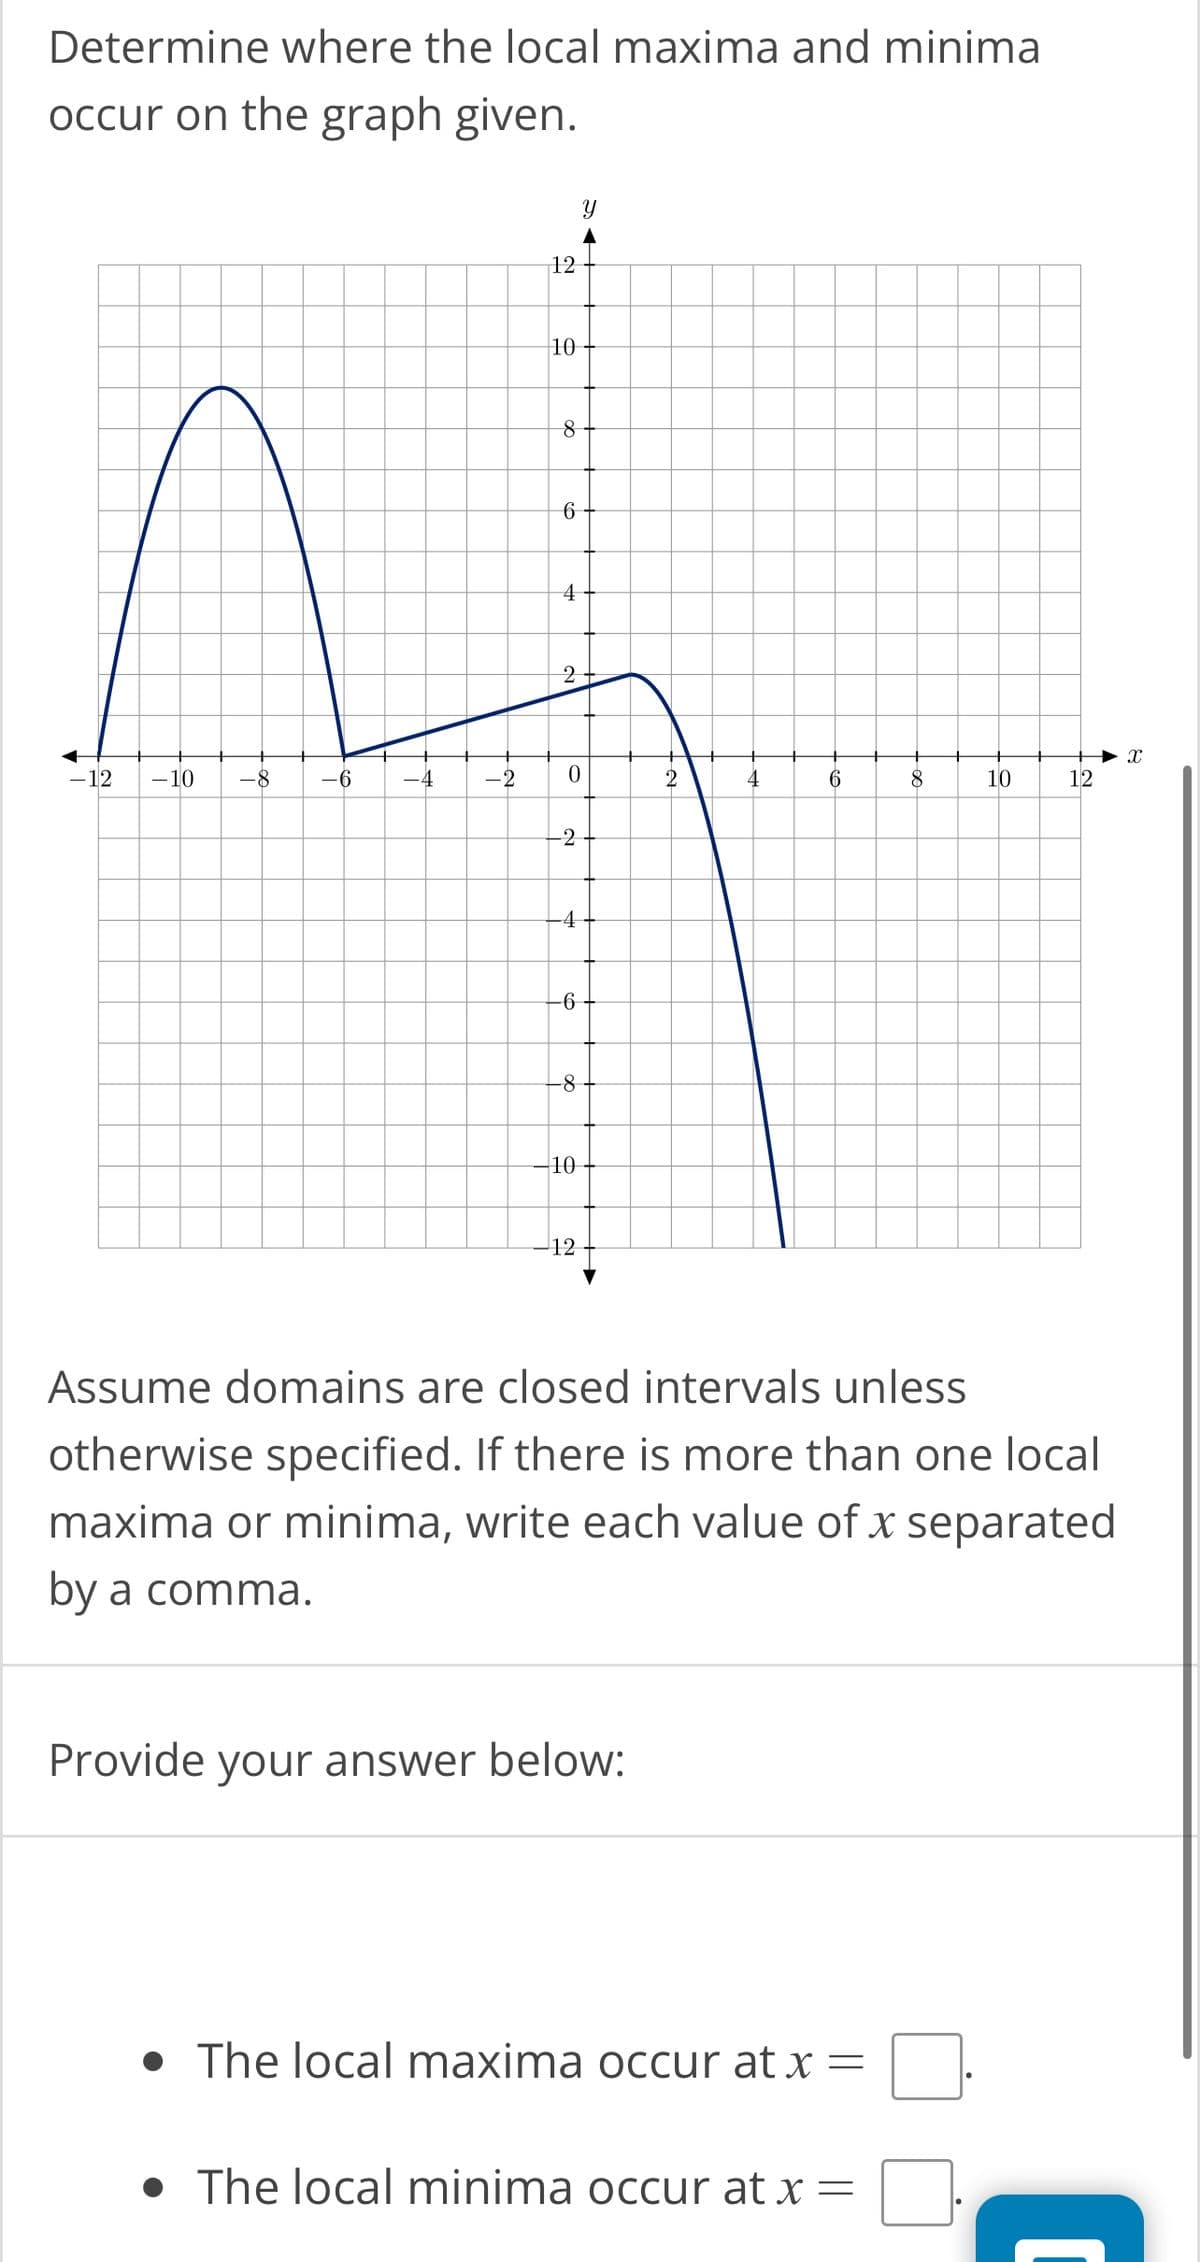 Determine where the local maxima and minima
occur on the graph given.
12
do
10
8
6
4
2
4
- 12 -10 -8 -6
-4
-2 0
2
4
6
-2
-4
-6
-8
10
Y
12
Provide your answer below:
• The local maxima occur at x =
8
• The local minima occur at x =
10
Assume domains are closed intervals unless
otherwise specified. If there is more than one local
maxima or minima, write each value of x separated
by a comma.
12
► X